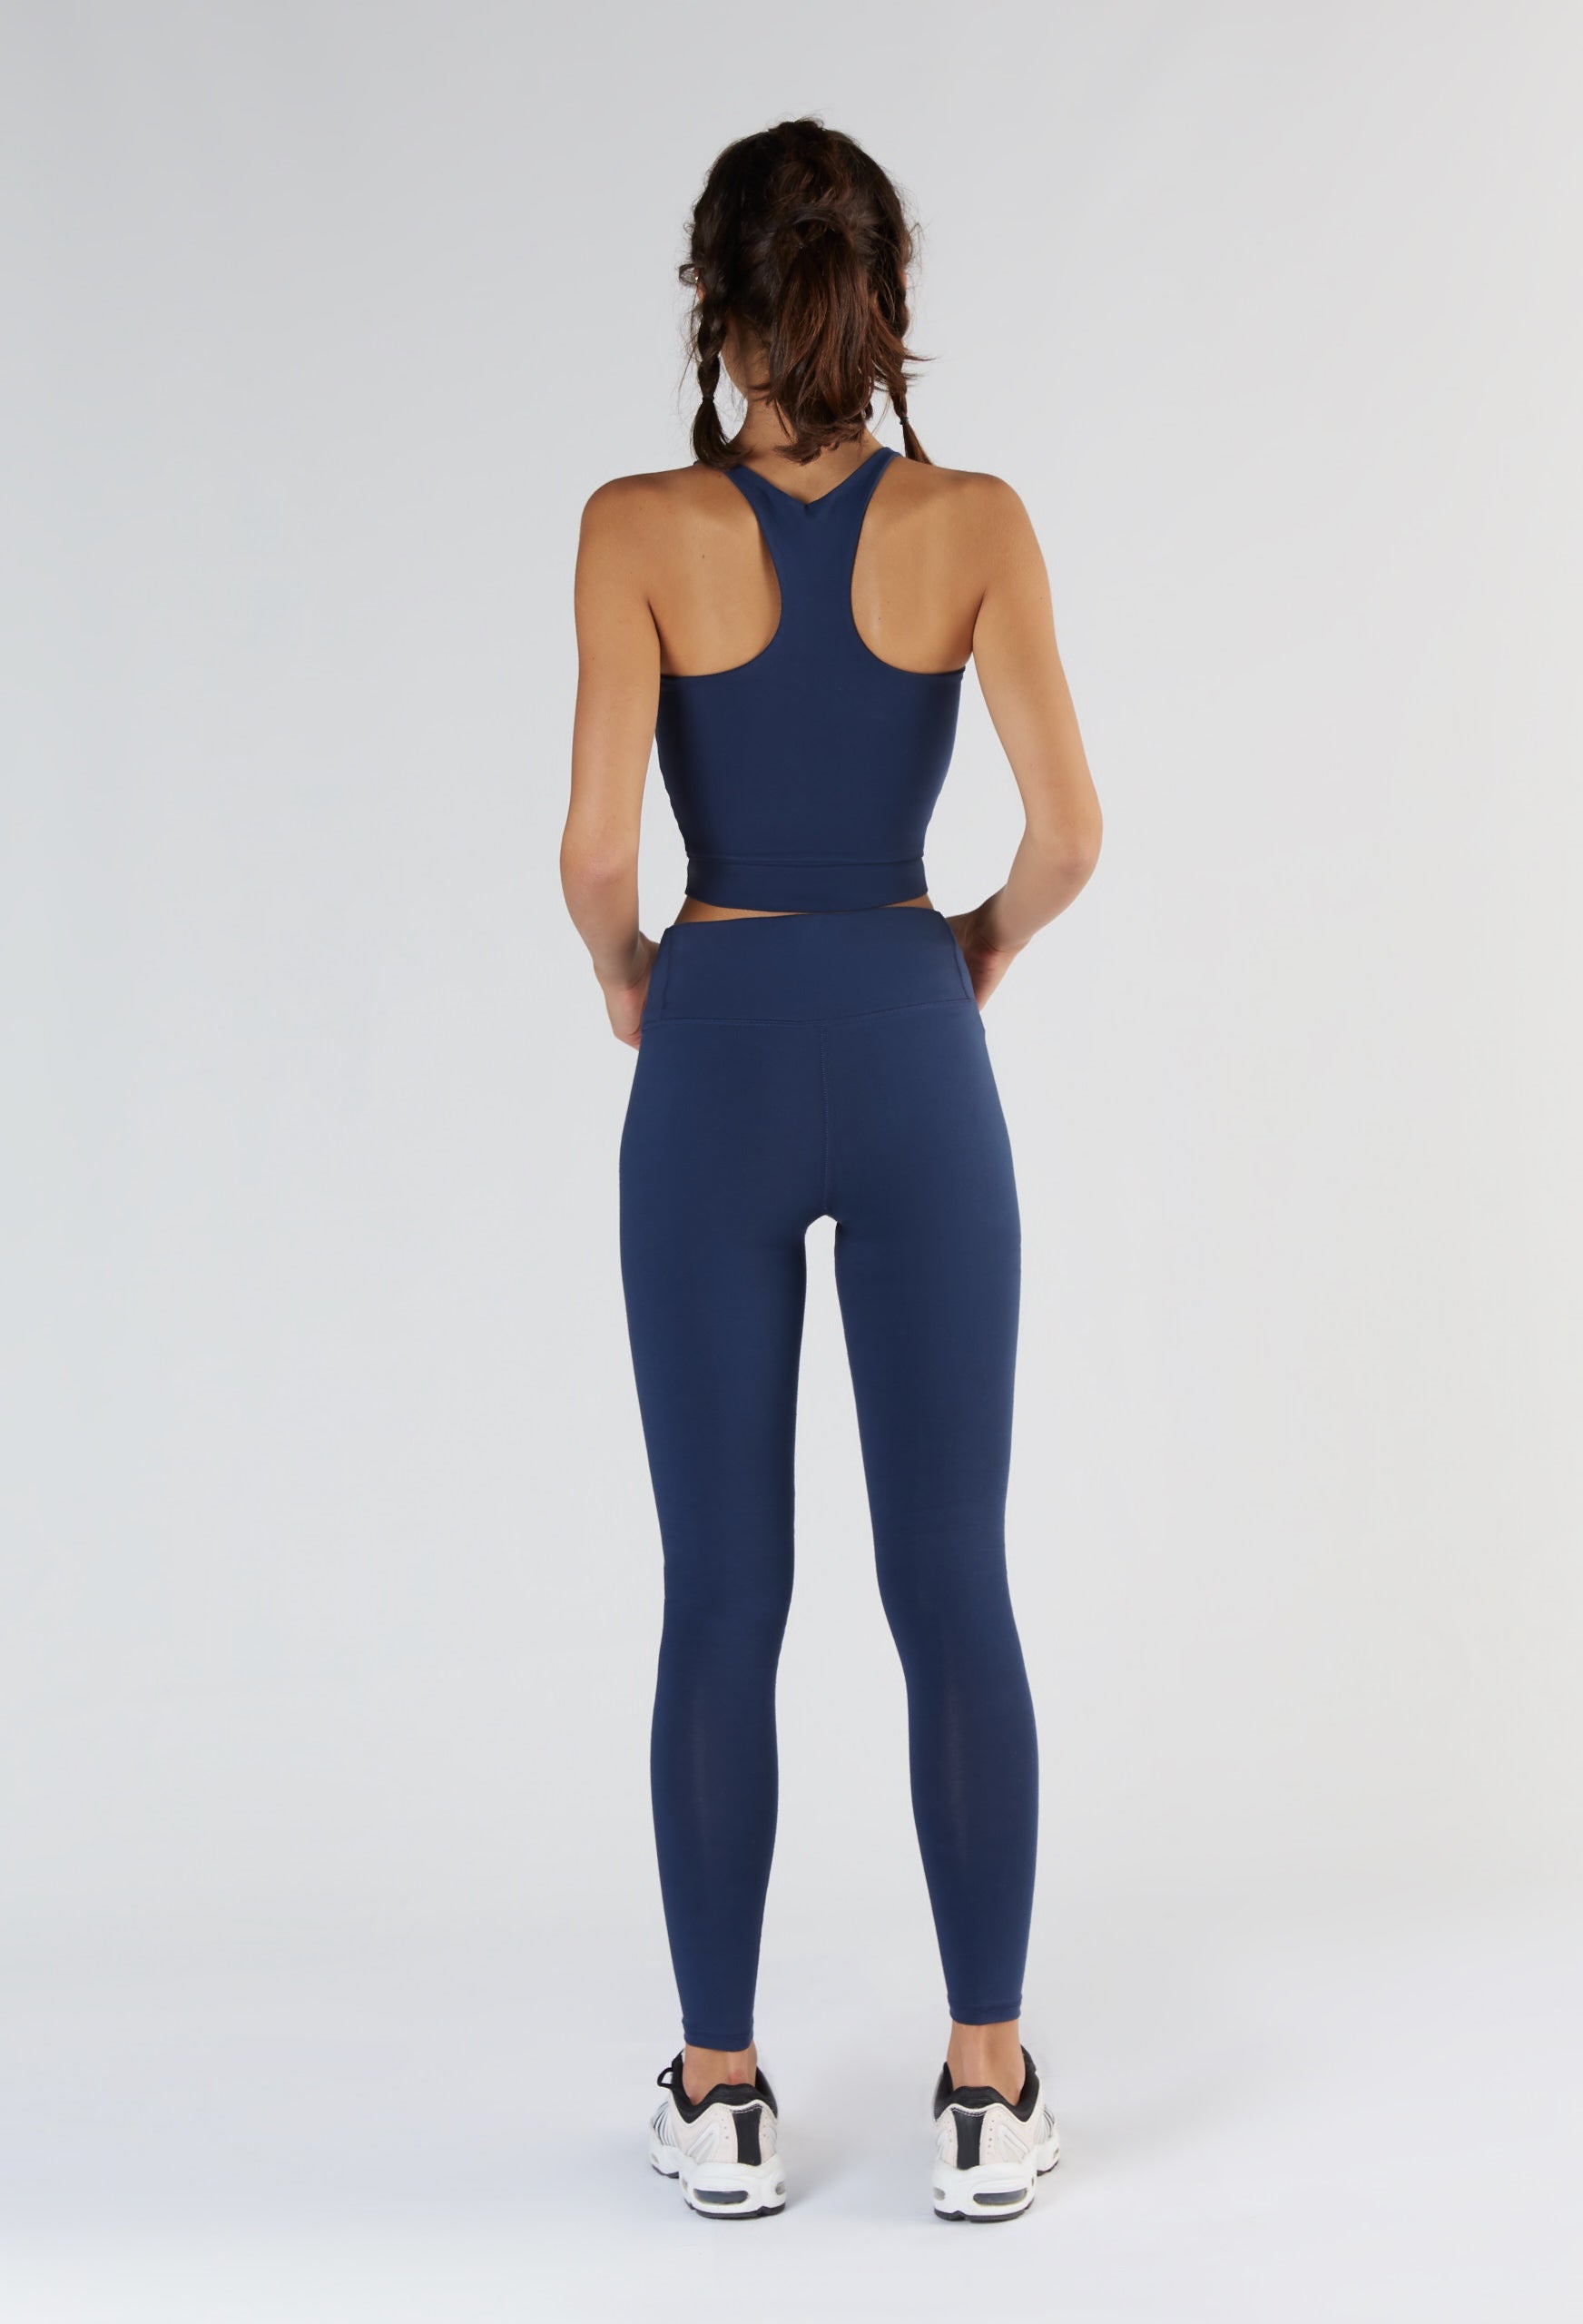 Organic Yoga Leggings by True North - French Navy - This Is Anyo